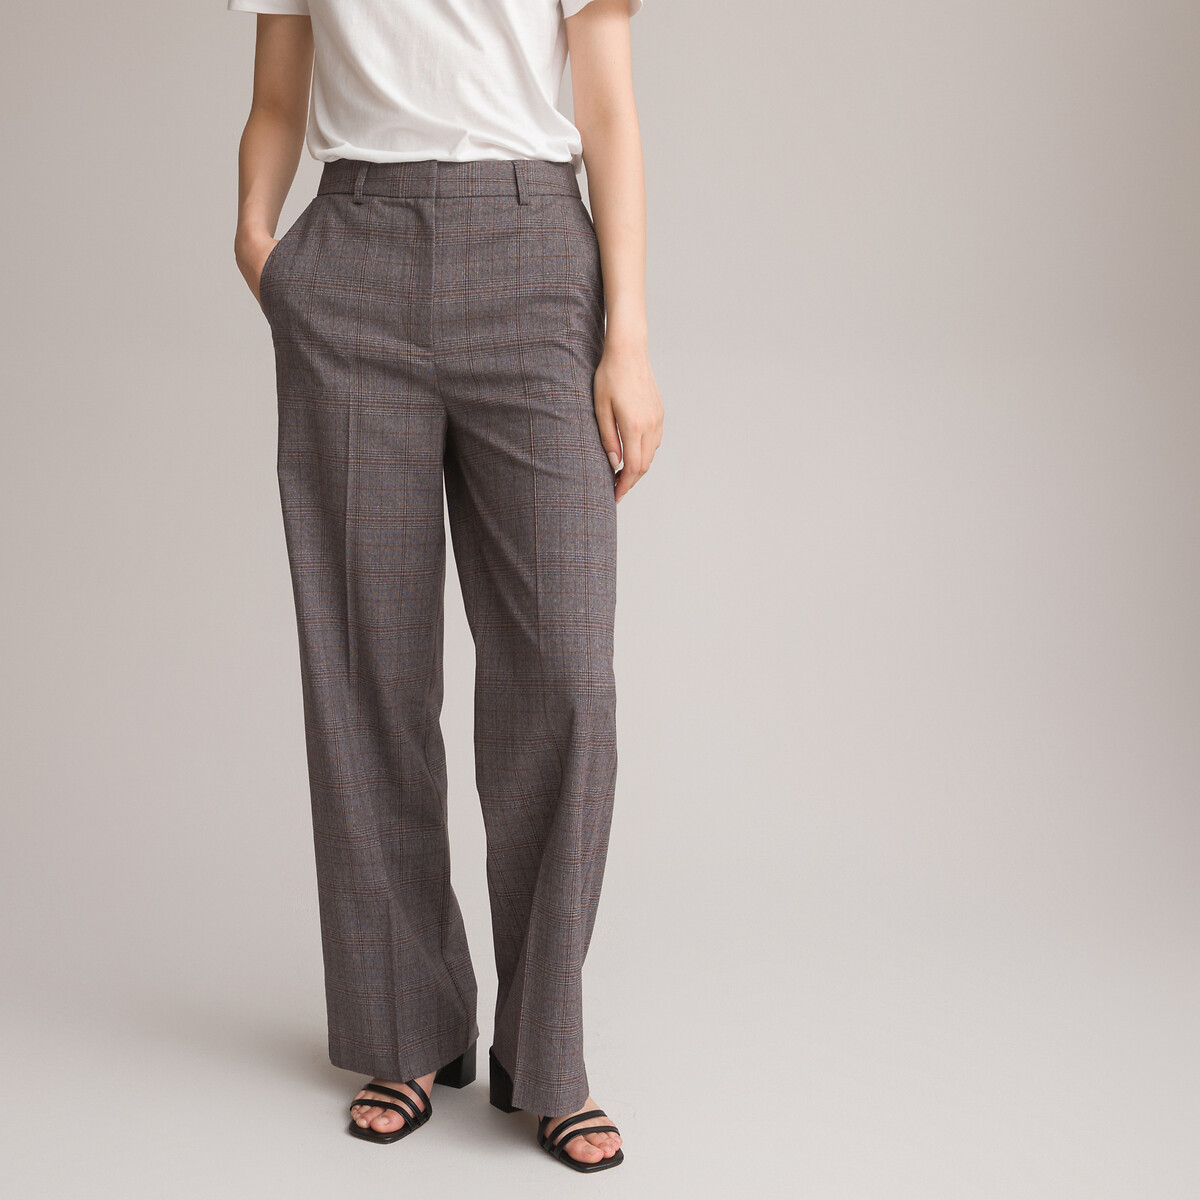 Wide Leg Trousers in Prince of Wales Check, Length 31.5"